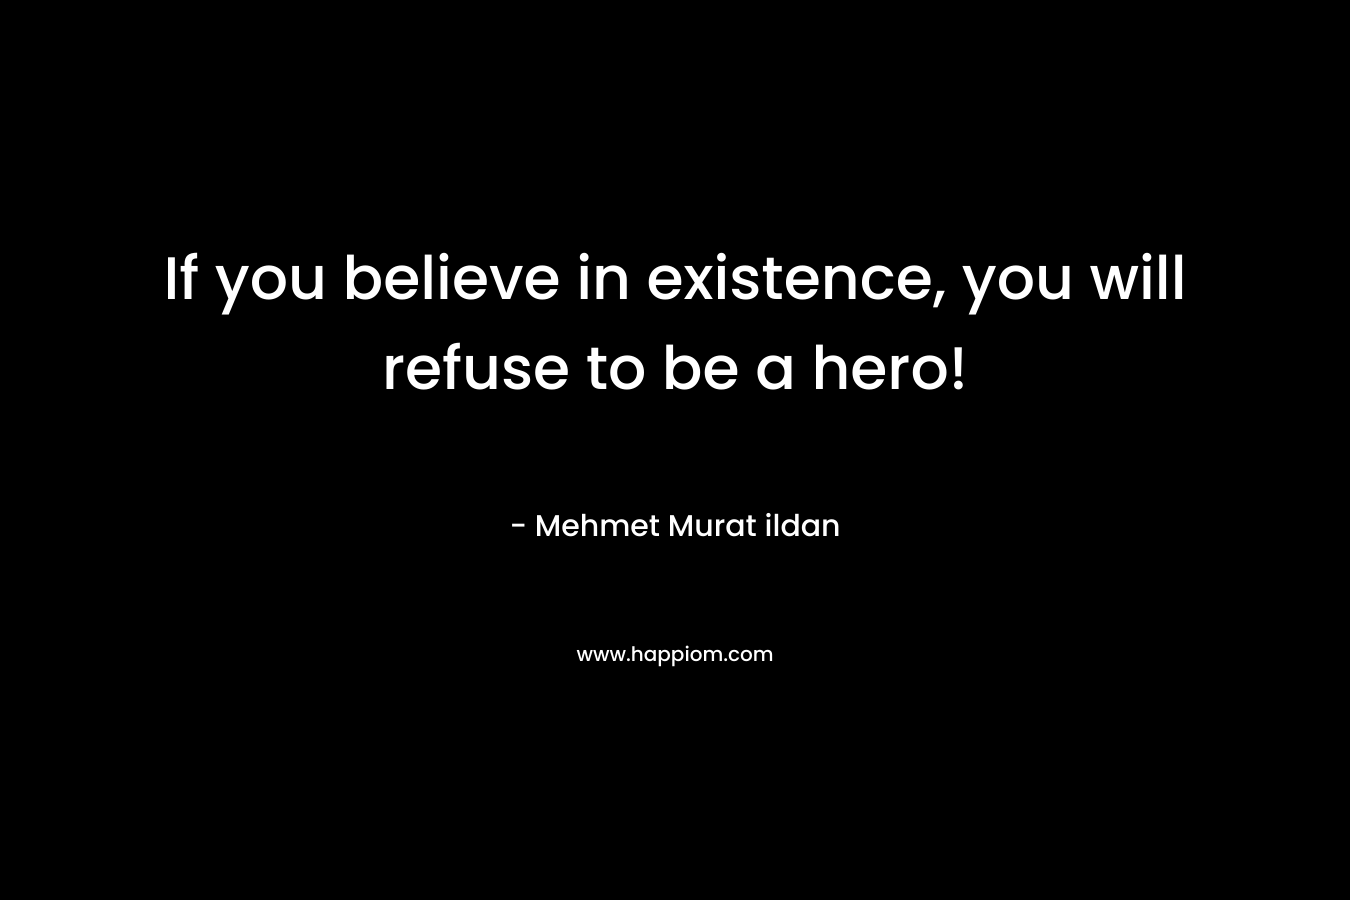 If you believe in existence, you will refuse to be a hero!